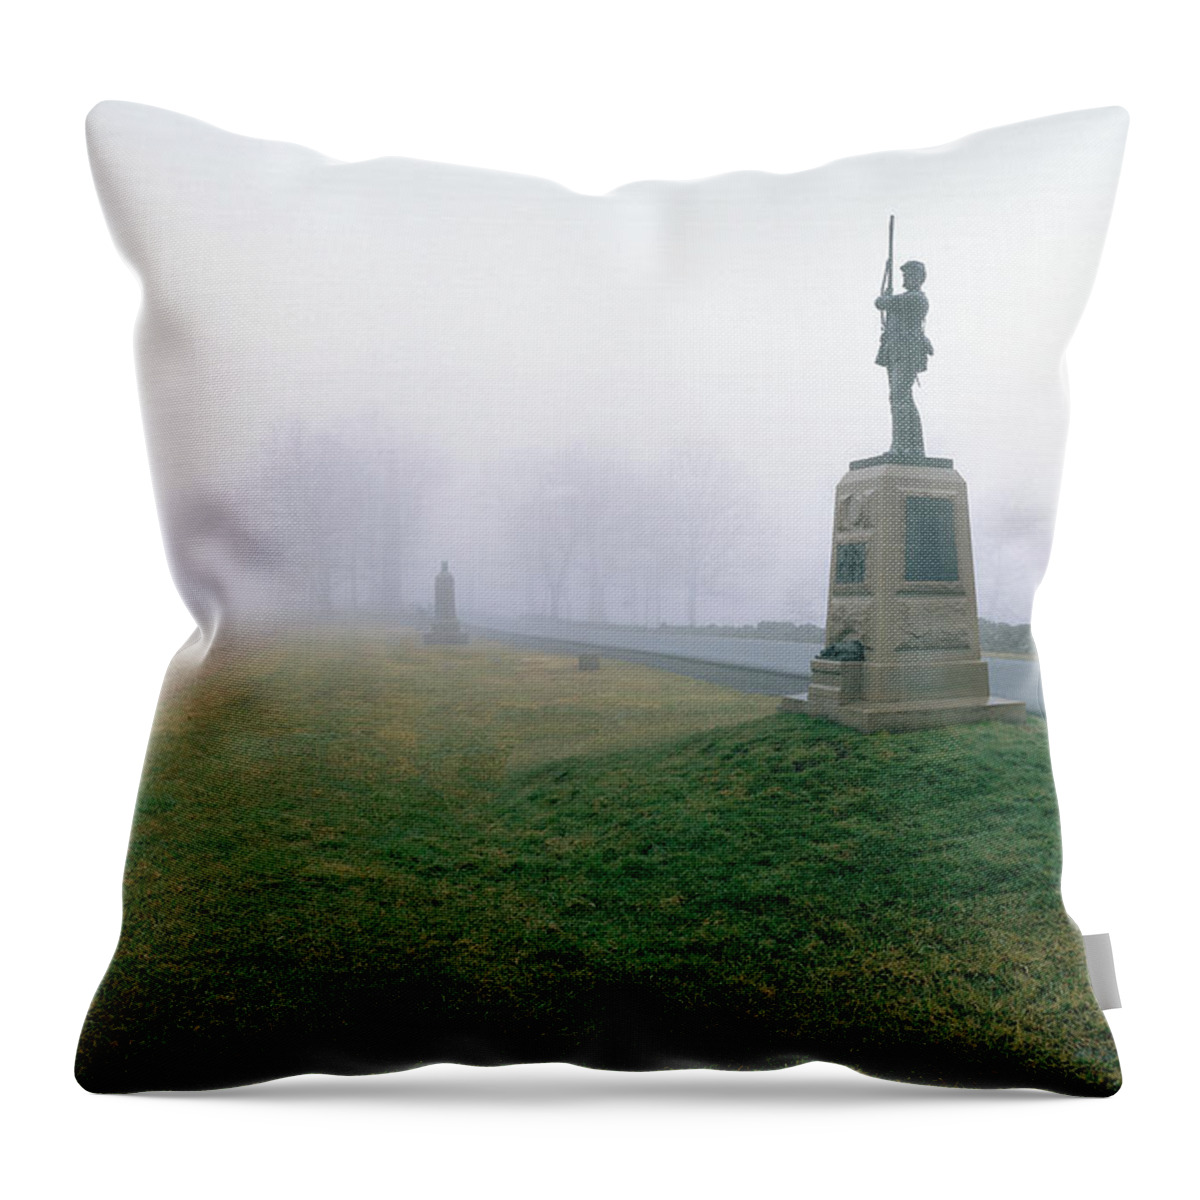 City Throw Pillow featuring the photograph The Mascot by Jan W Faul